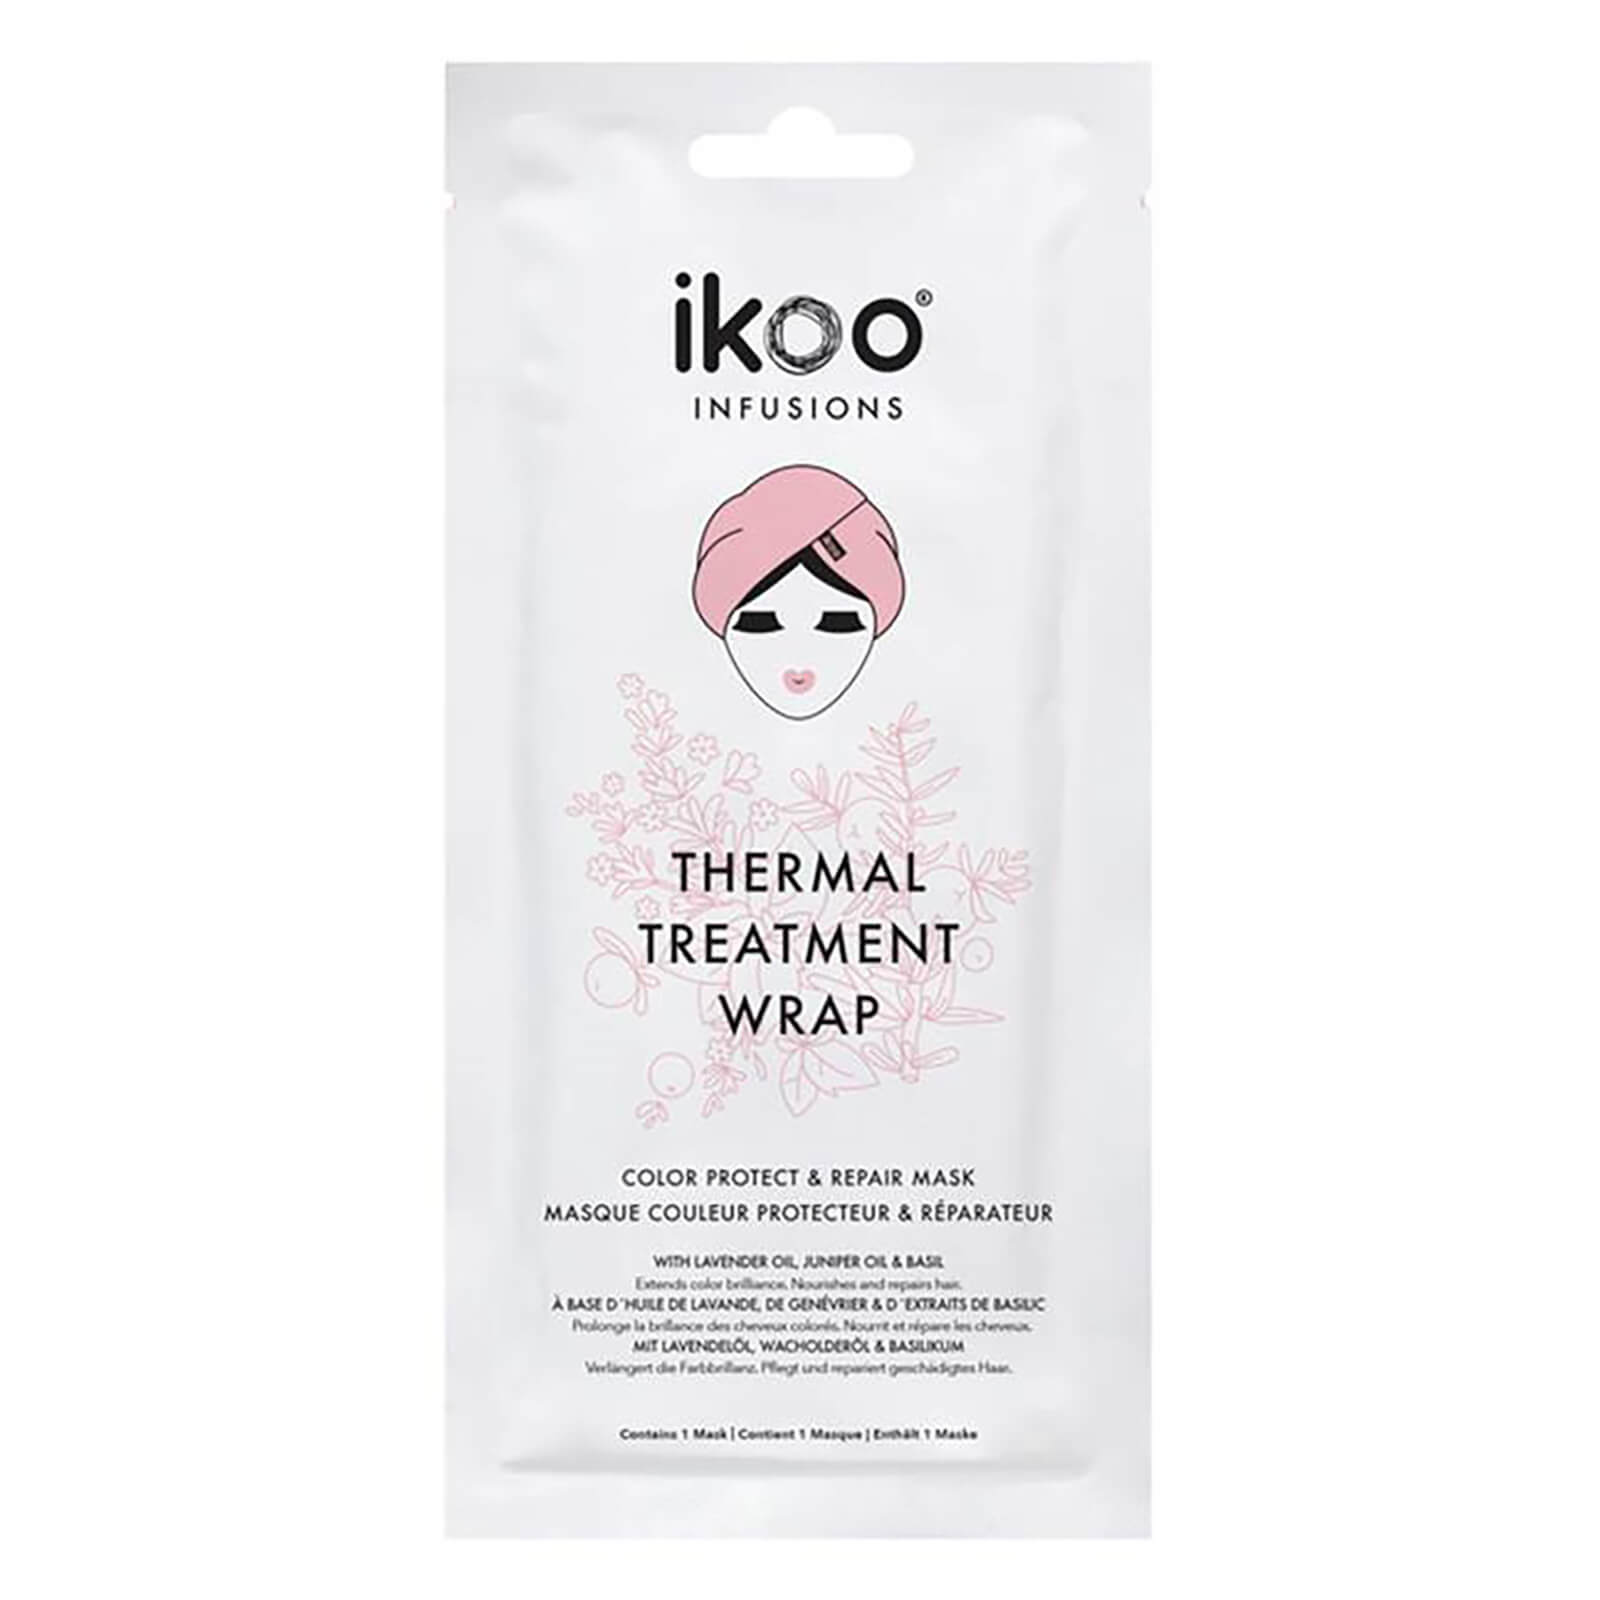 ikoo Infusions Thermal Treatment Hair Wrap Color Protect and Repair Mask 35g